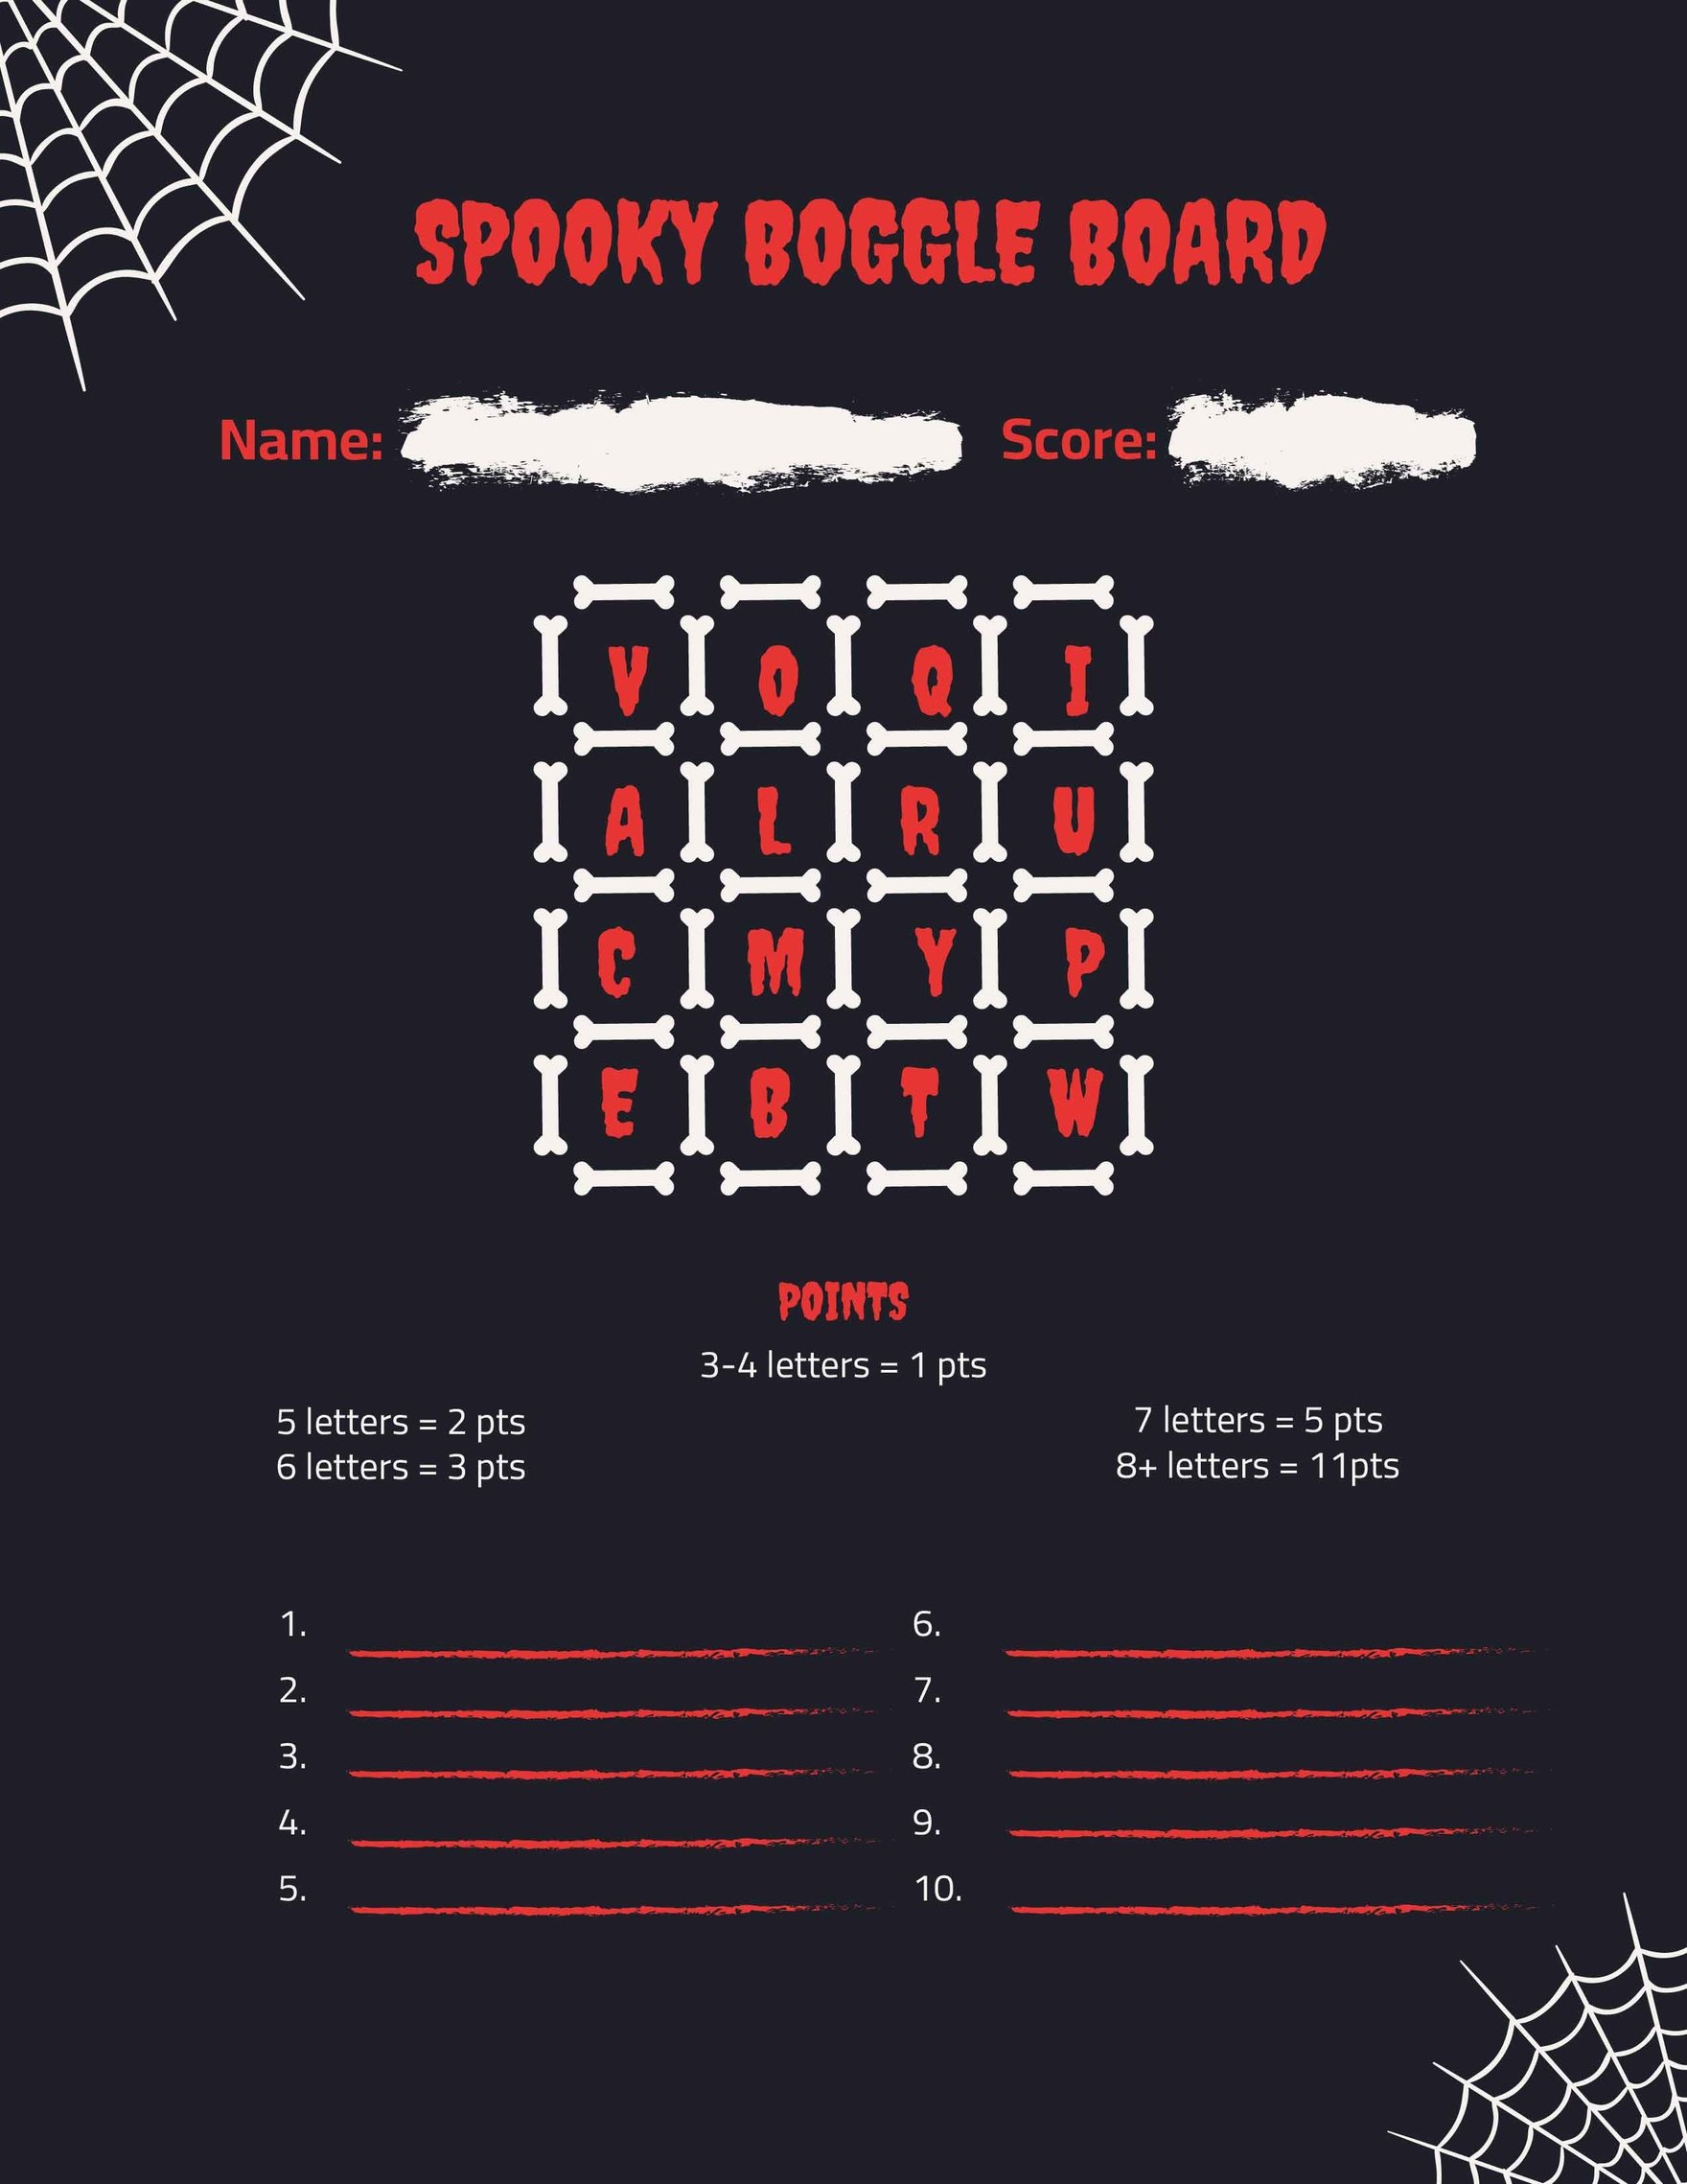 Free Spooky Boggle Board Template in Word, Google Docs, PDF, Apple Pages